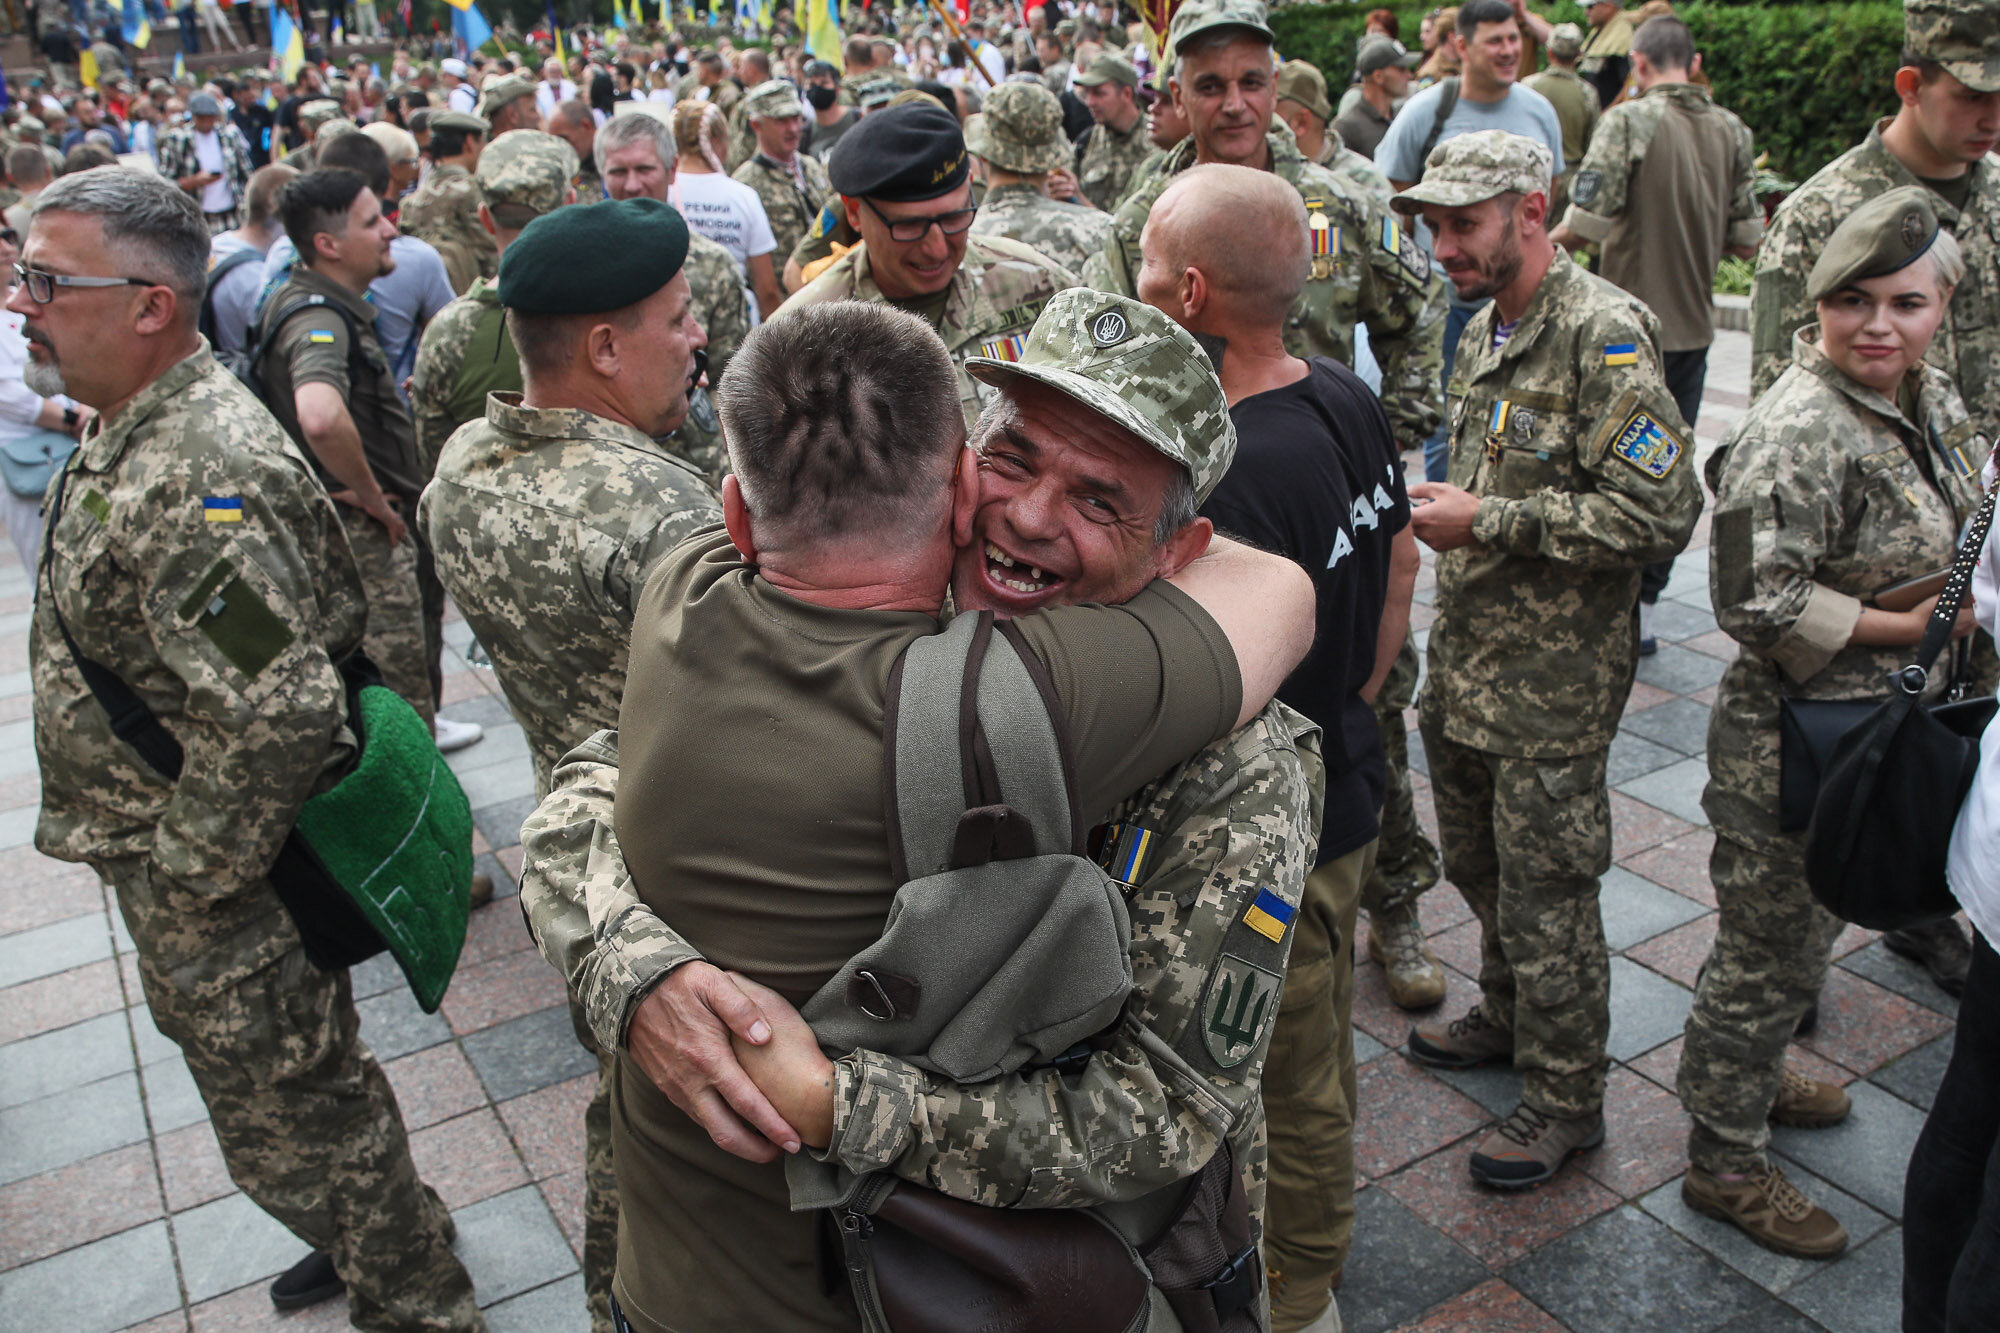 Soldiers hug as they meet before the March of Defenders of Ukraine, an event where the participants marched from Shevchenko Park to Maidan Nezalezhnosti as part of Ukraine&#8217;s Independence Day celebrations in Kyiv on Aug. 24, 2020.